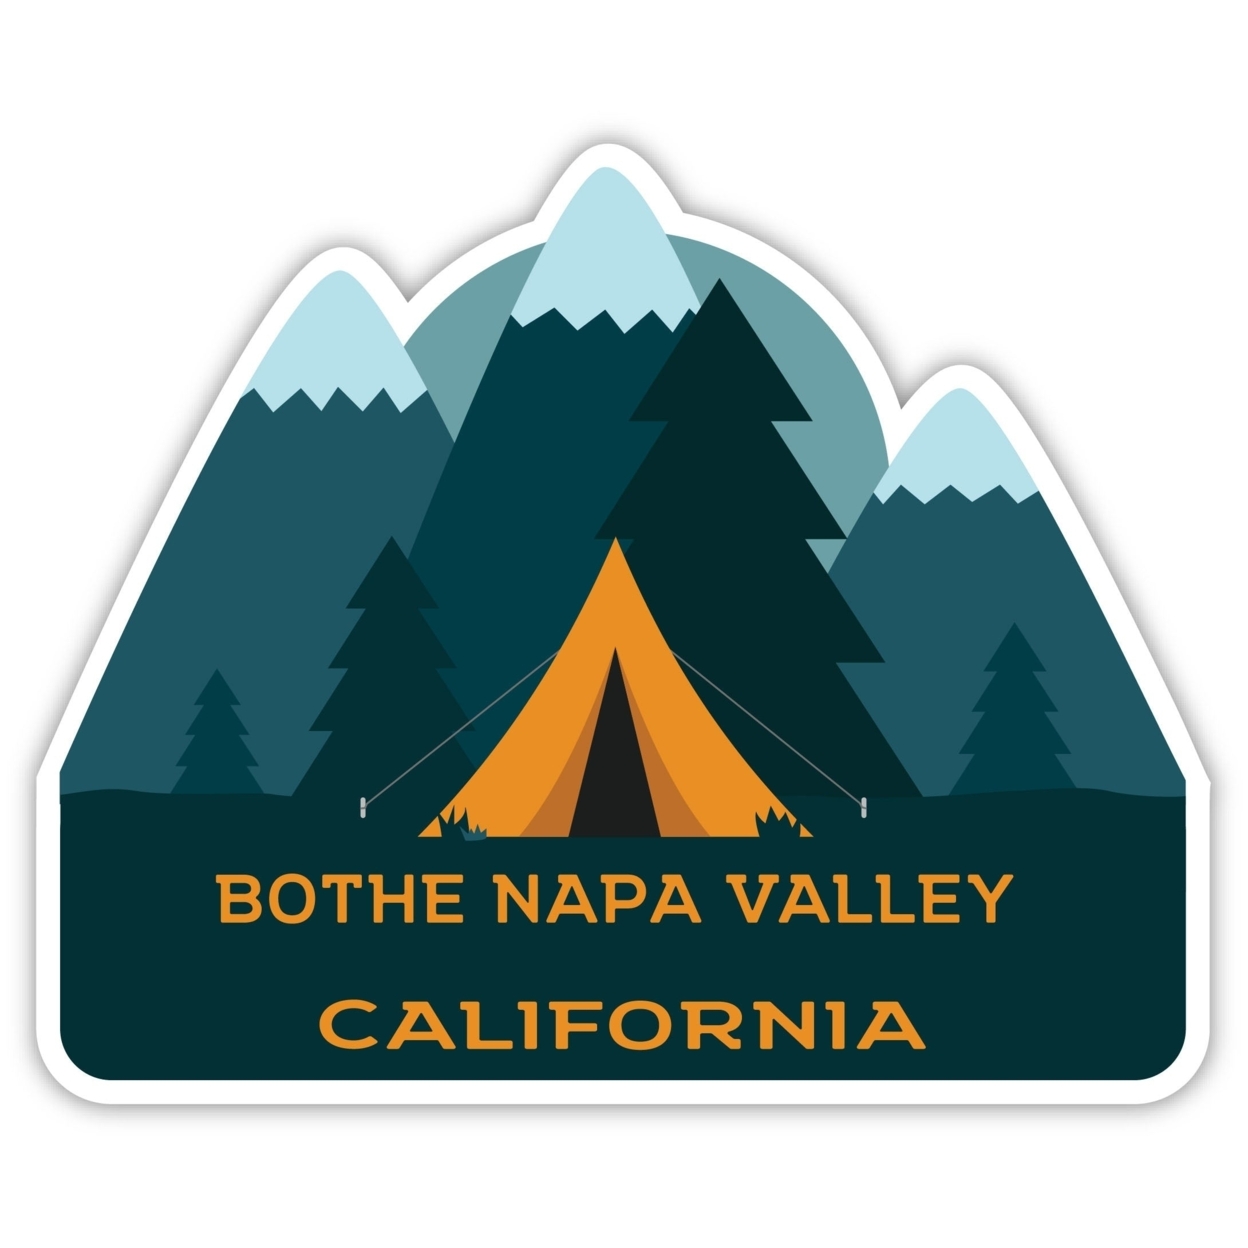 Bothe Napa Valley California Souvenir Decorative Stickers (Choose Theme And Size) - 4-Pack, 2-Inch, Tent